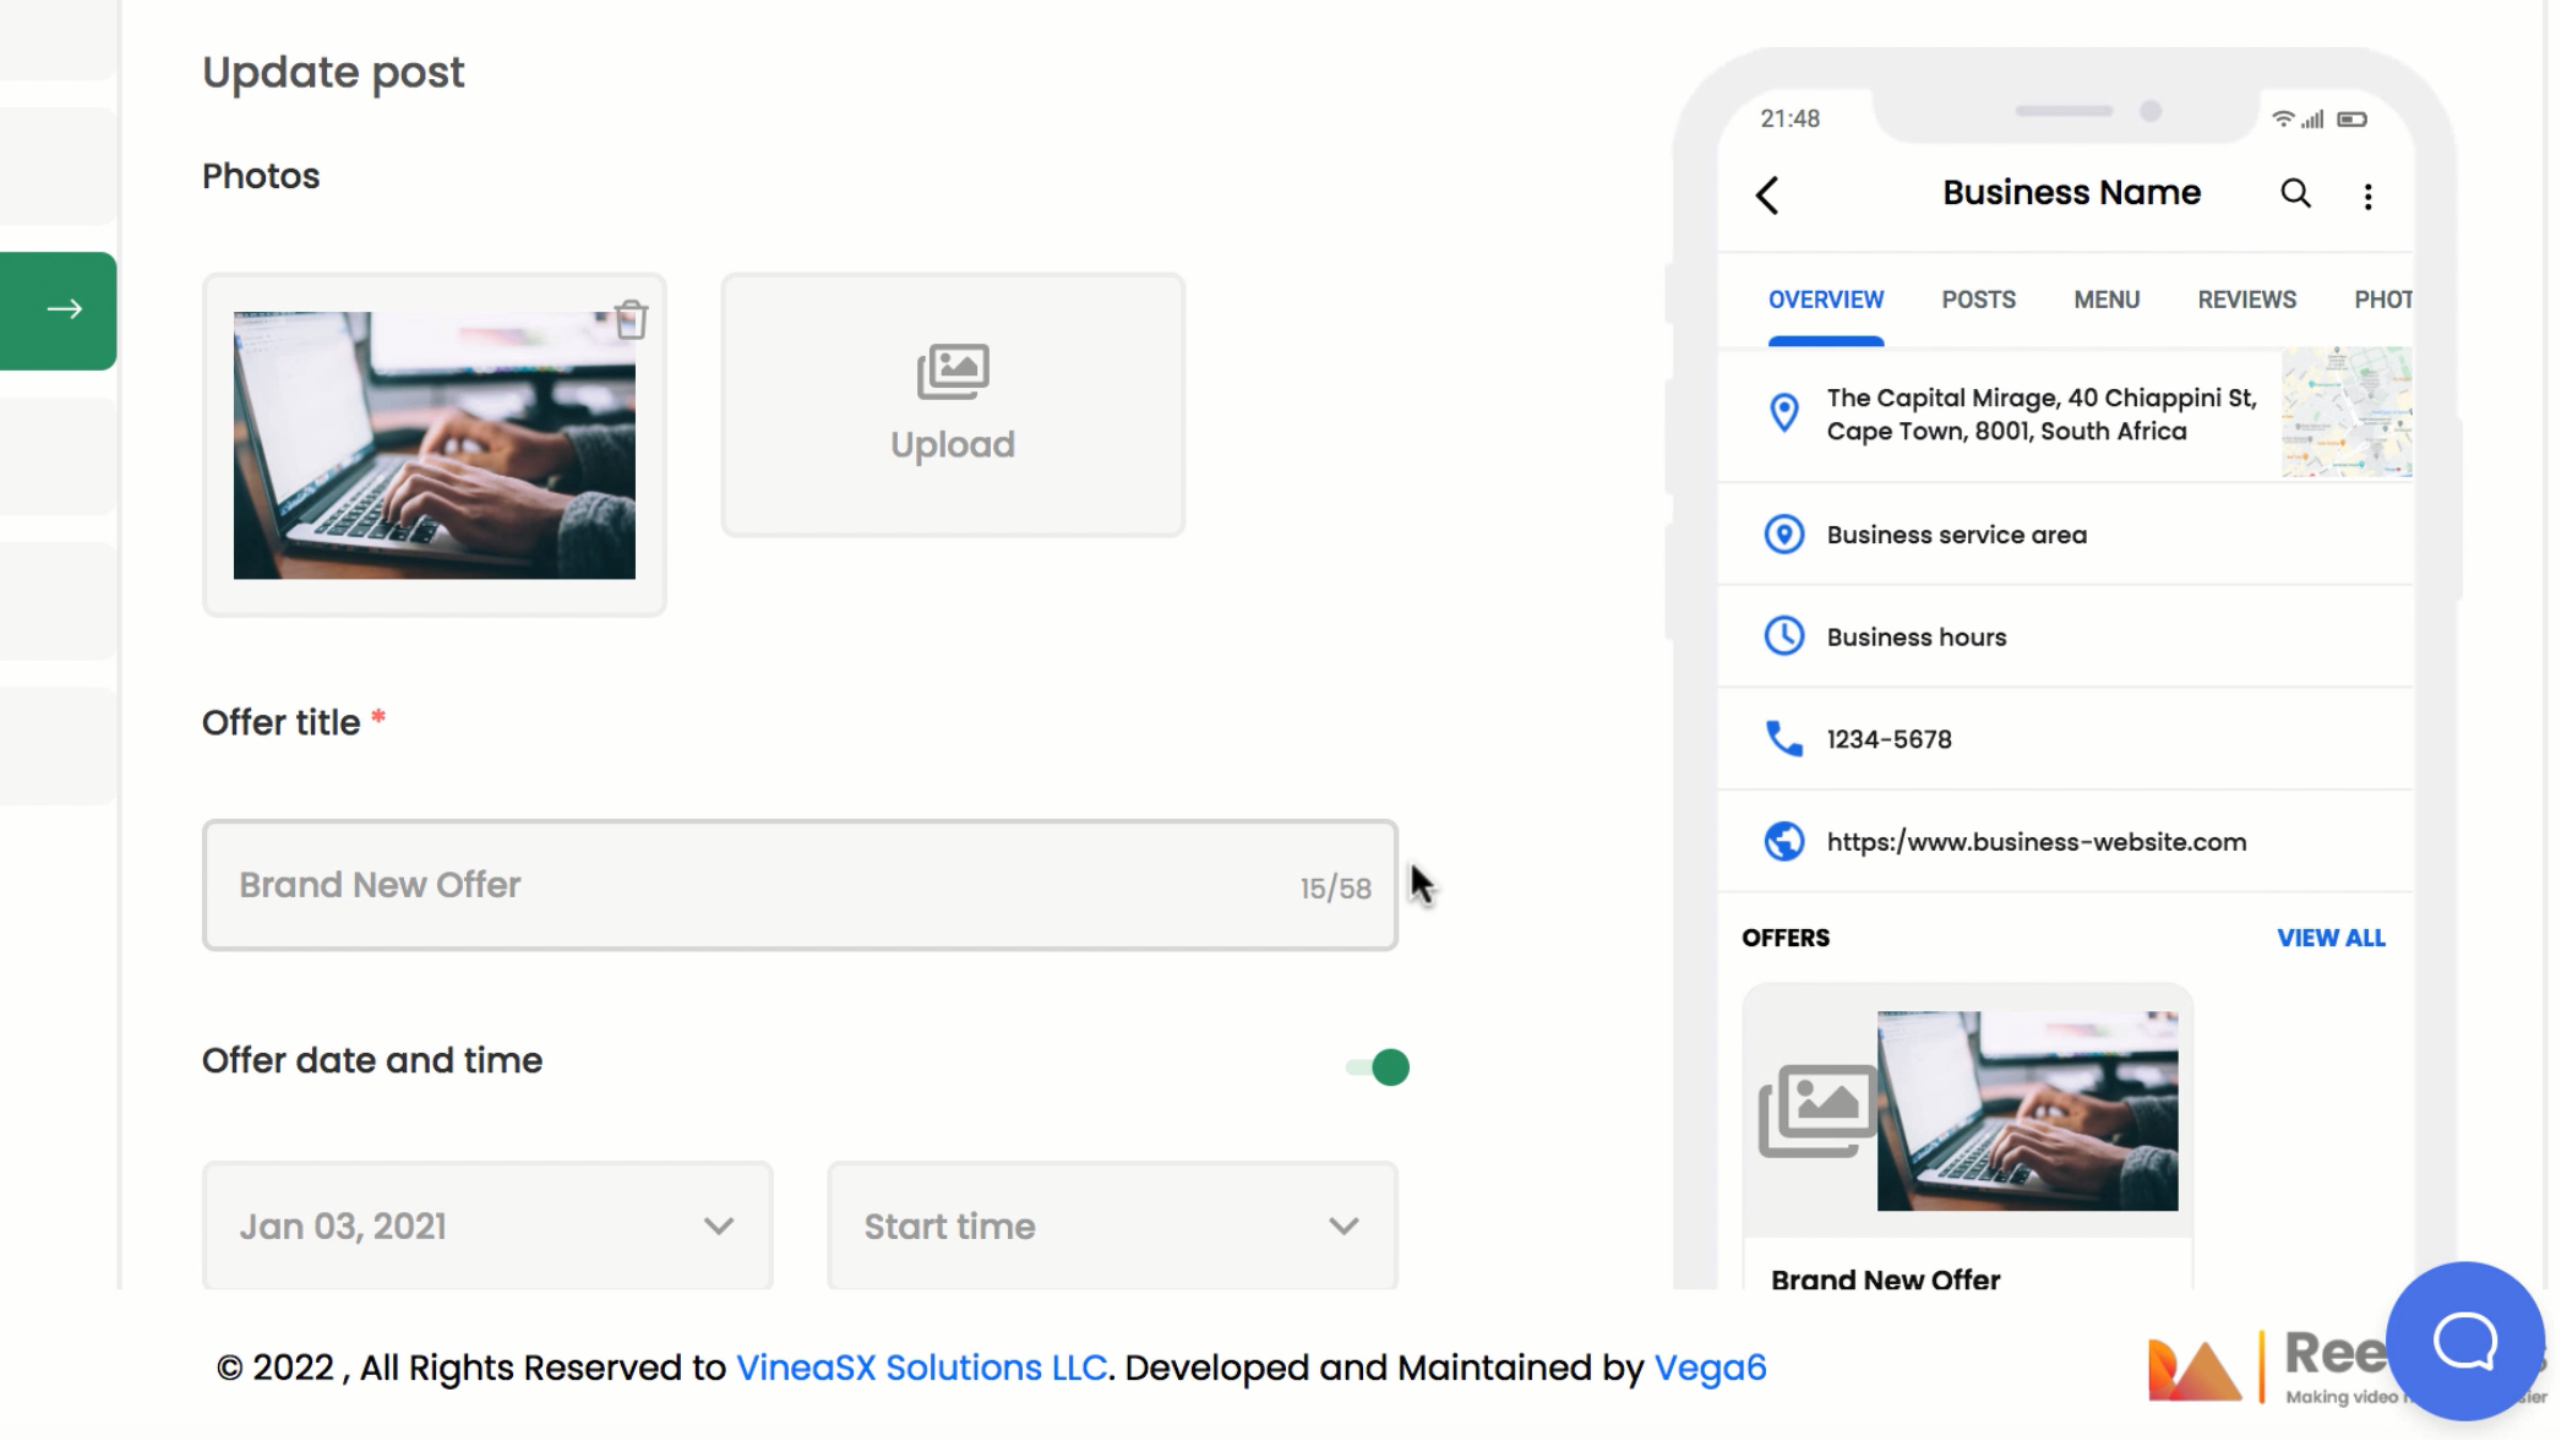 googlelocalofferfeature This App Find Leads, Claim Local Profiles and Run a Reputation Management Agency with Brand New Review Automation Tech. #Reputor #Digitalmarketing